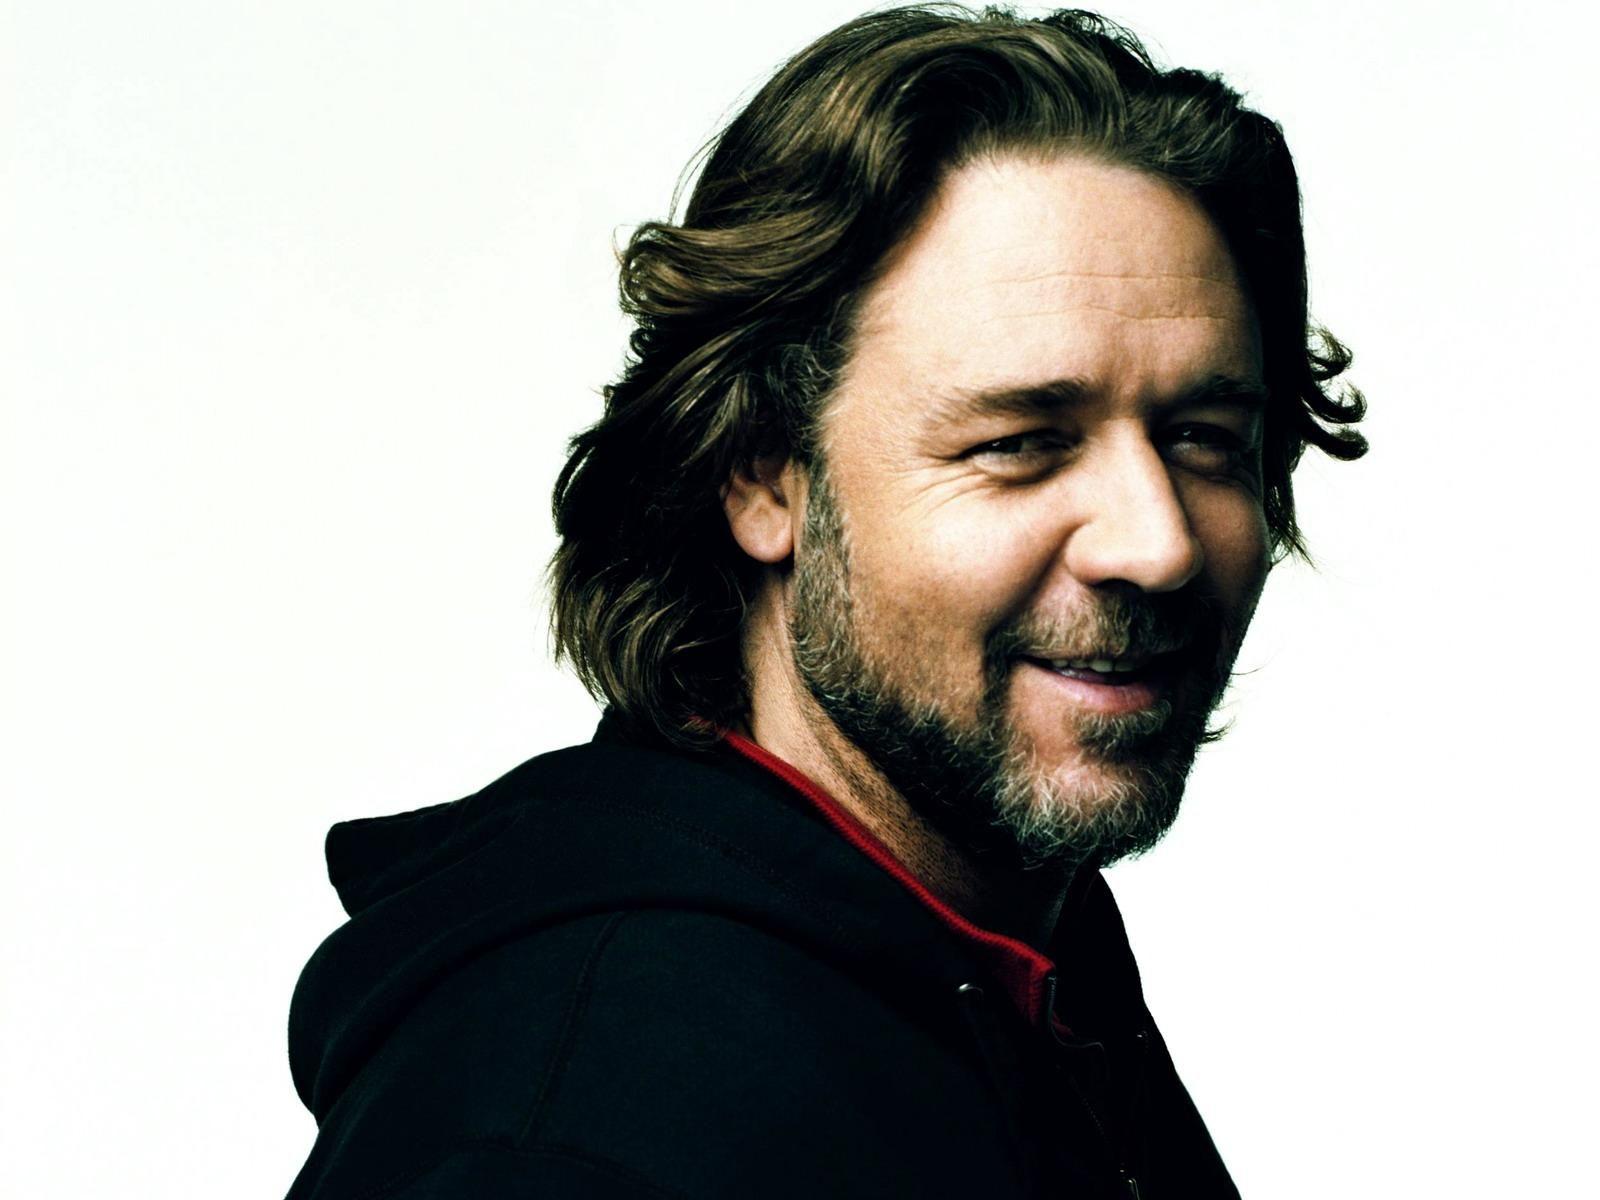 Russell Crowe Computer Wallpaper 52379 1600x1200 px